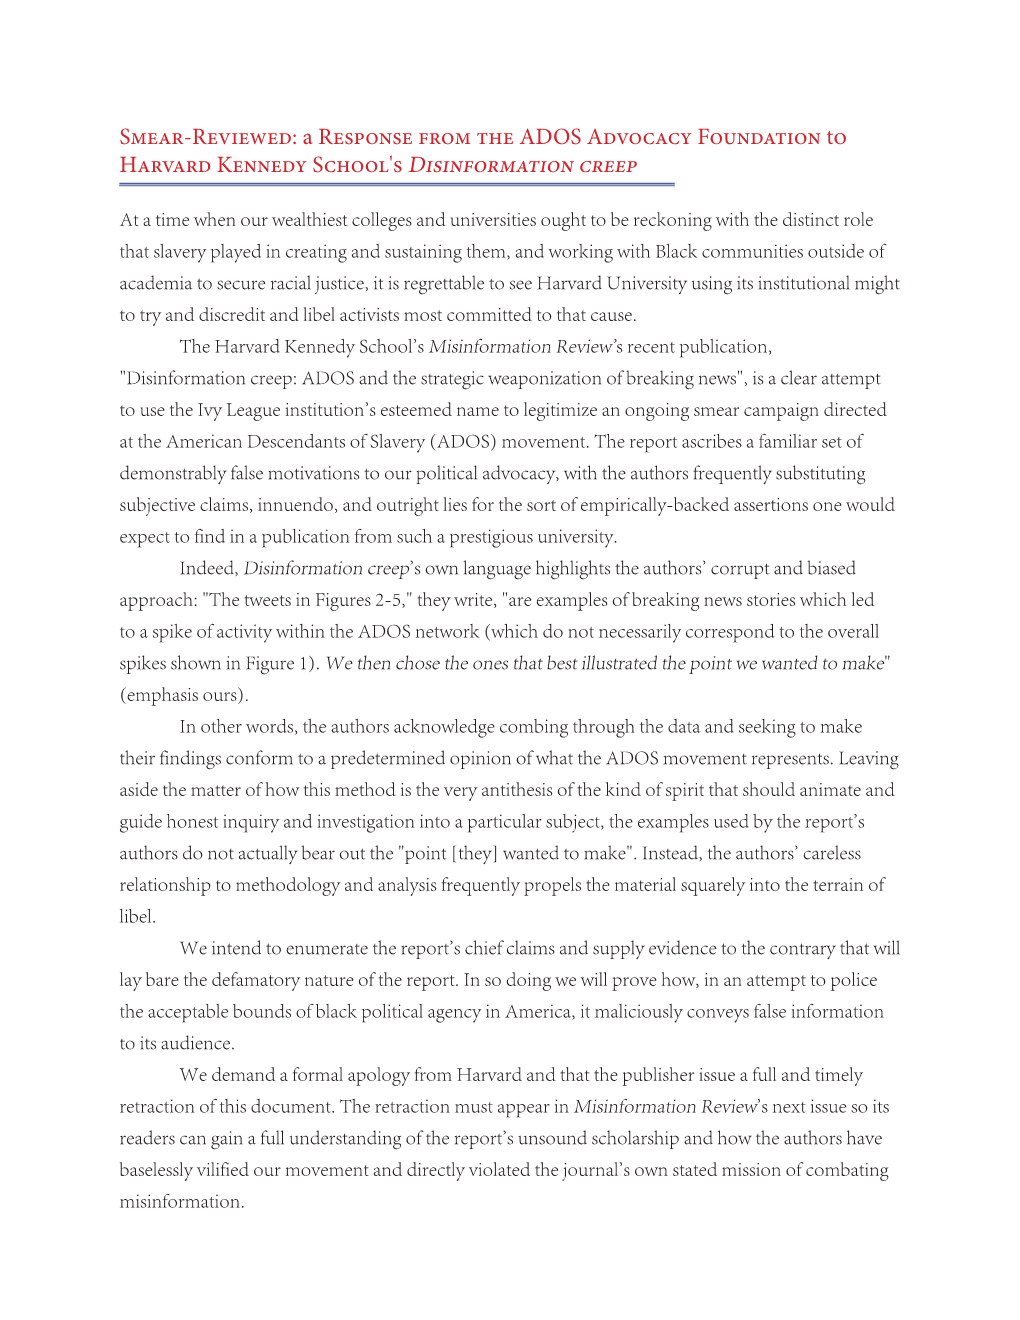 A Response from the ADOS Advocacy Foundation to Harvard Kennedy School's Disinformation Creep